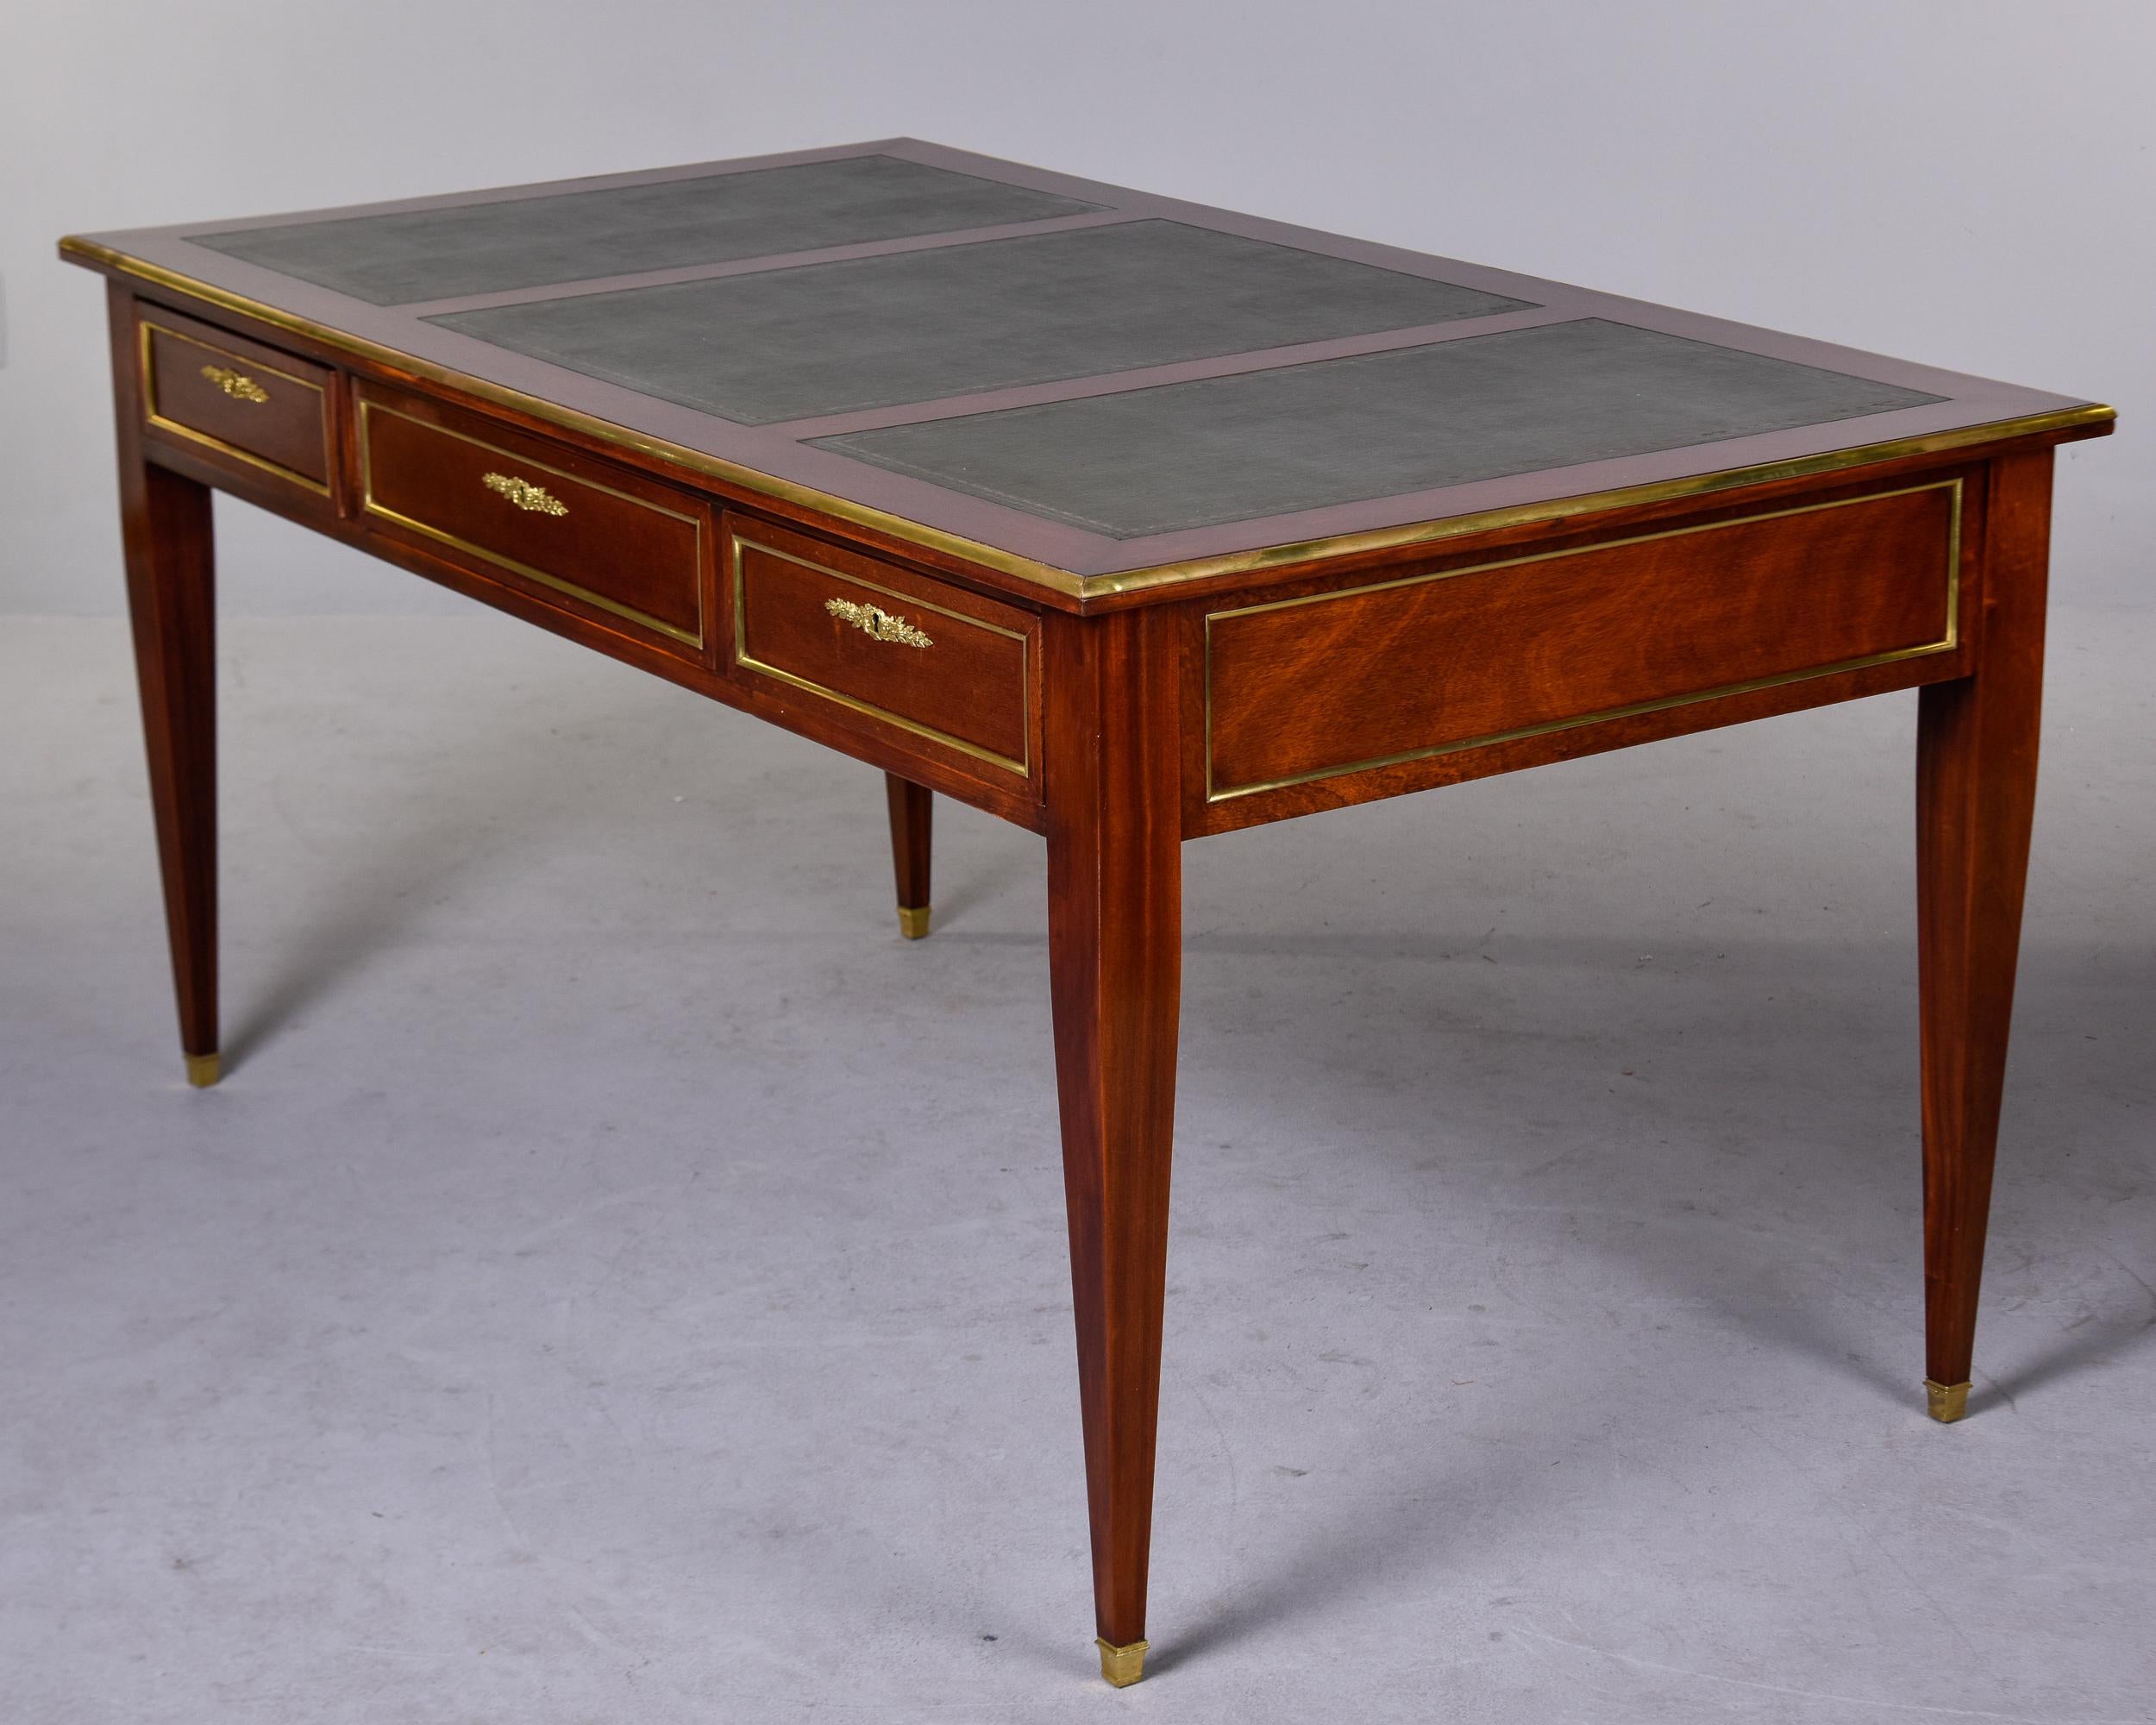 Early 19th Century Louis XVI Style Large Mahogany Desk with Green Leather Top For Sale 1